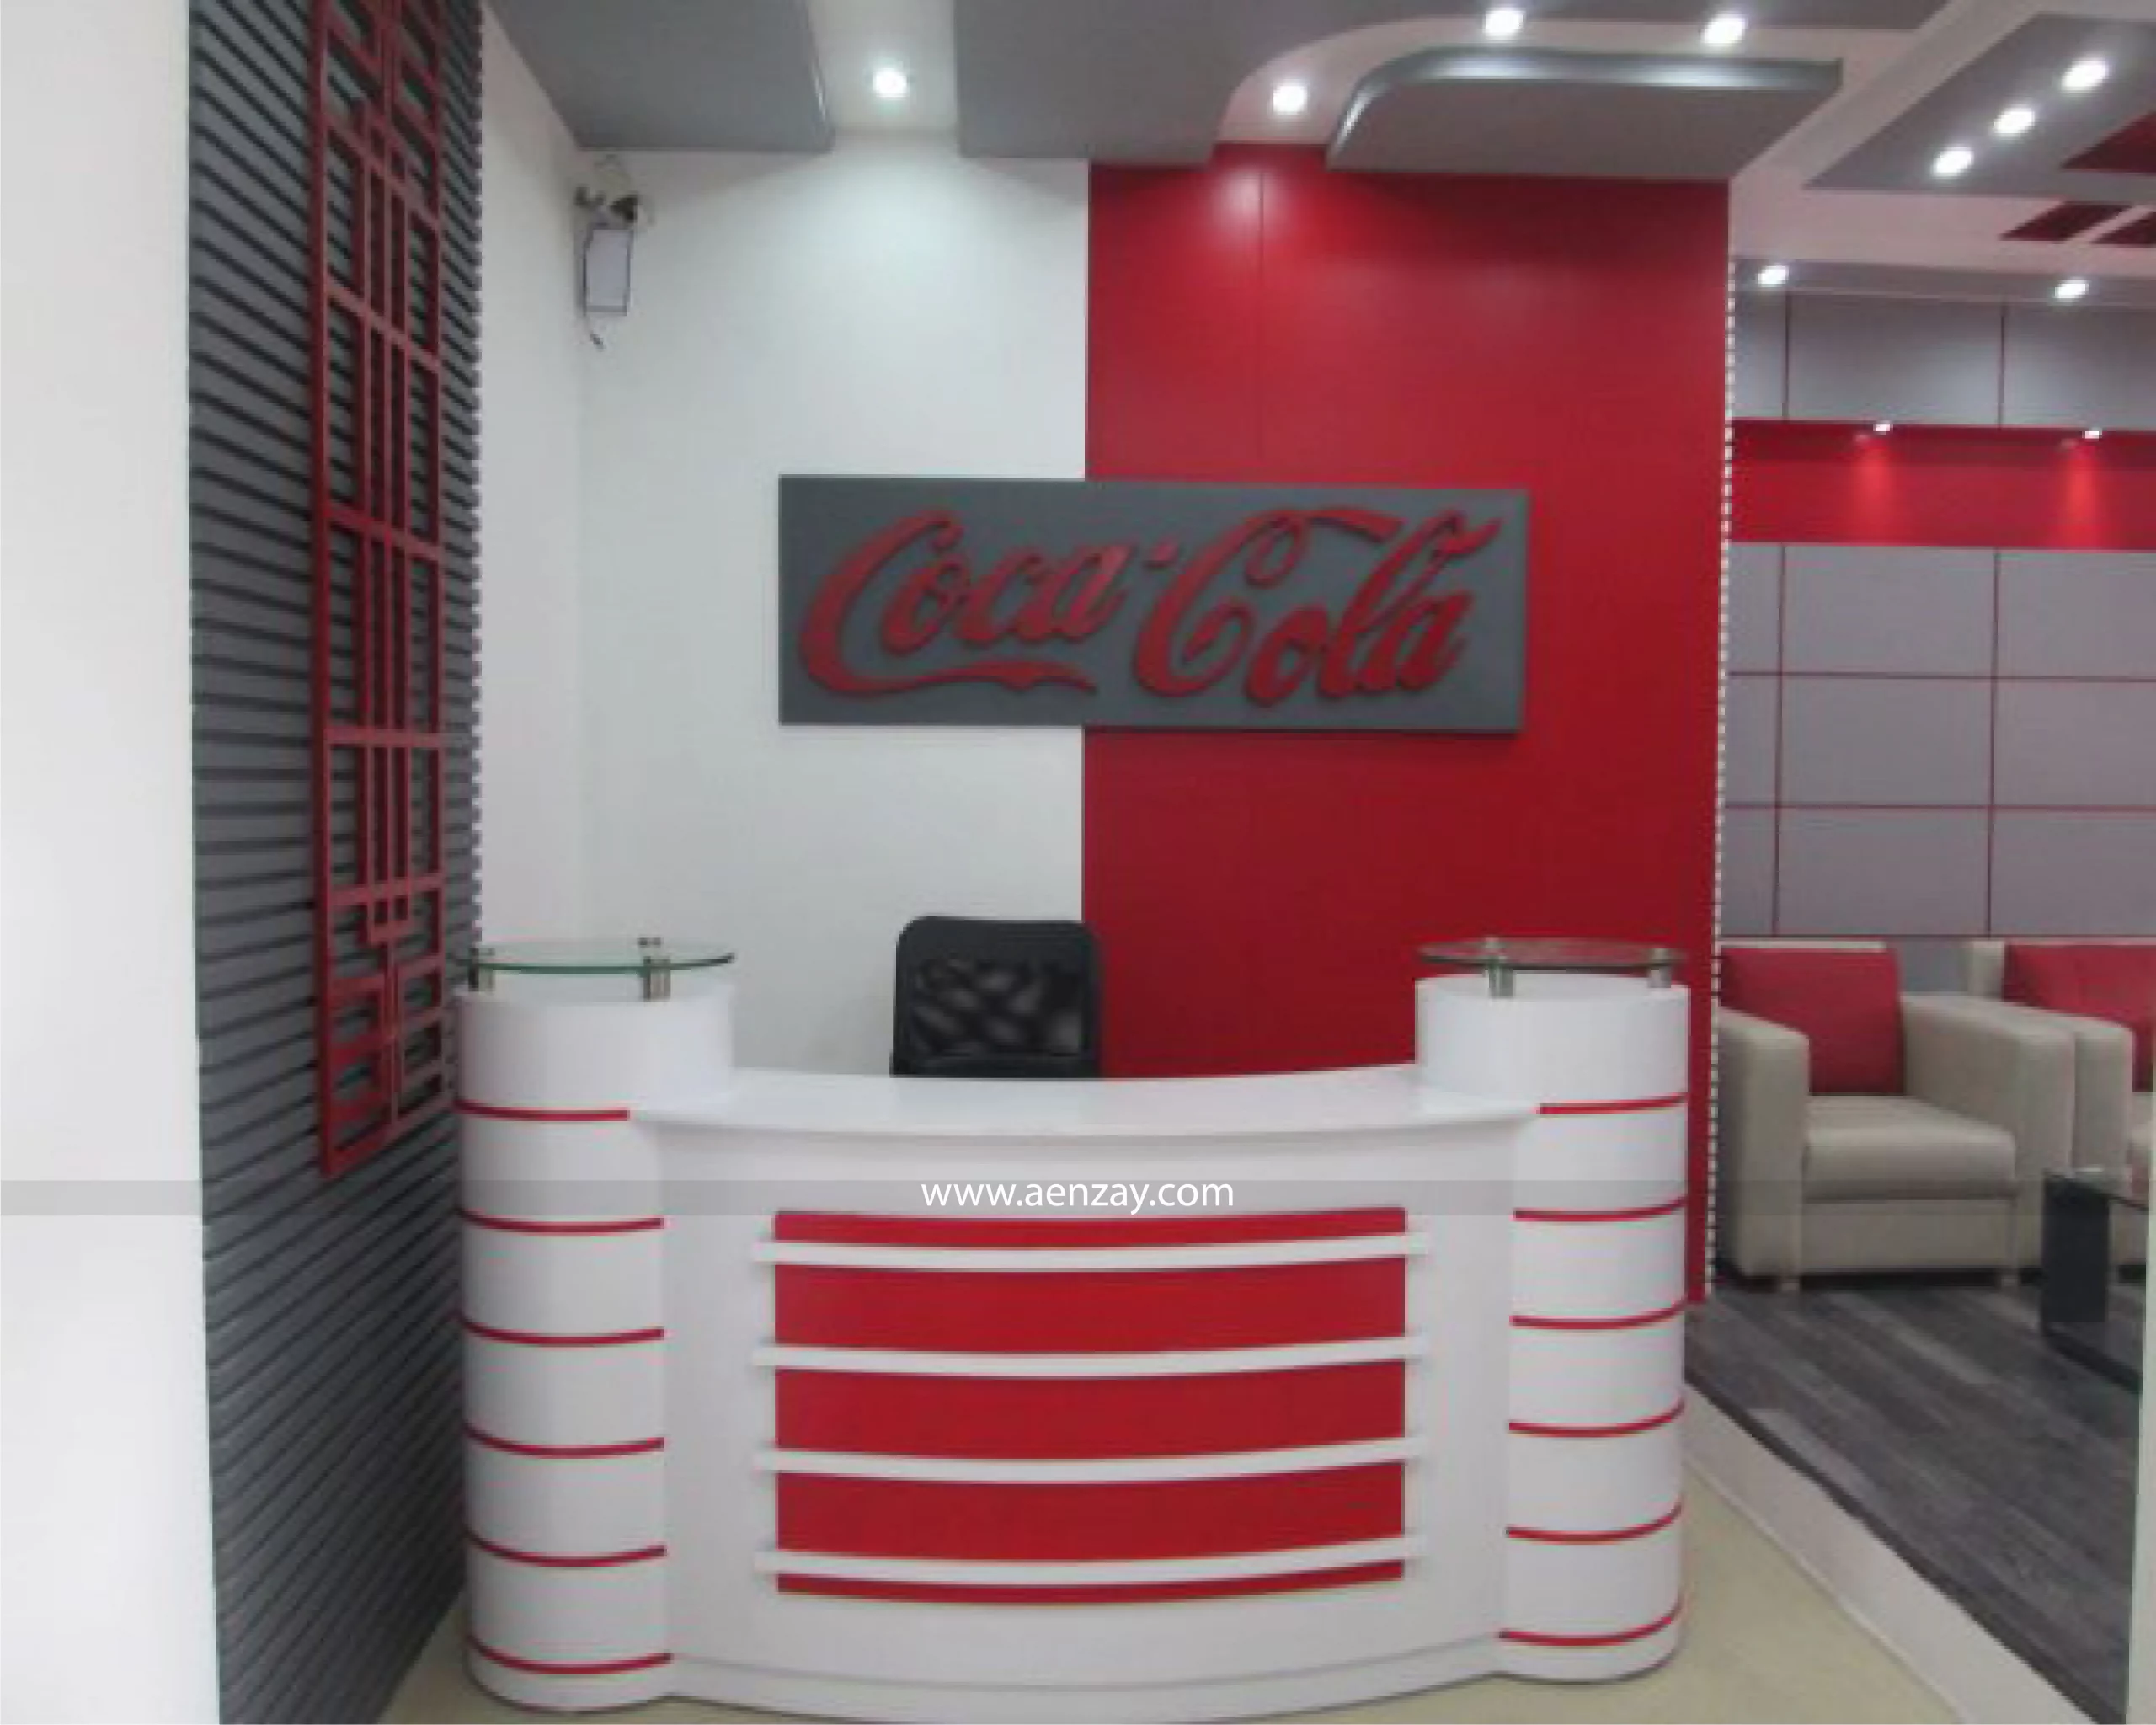 Reception area designs for office